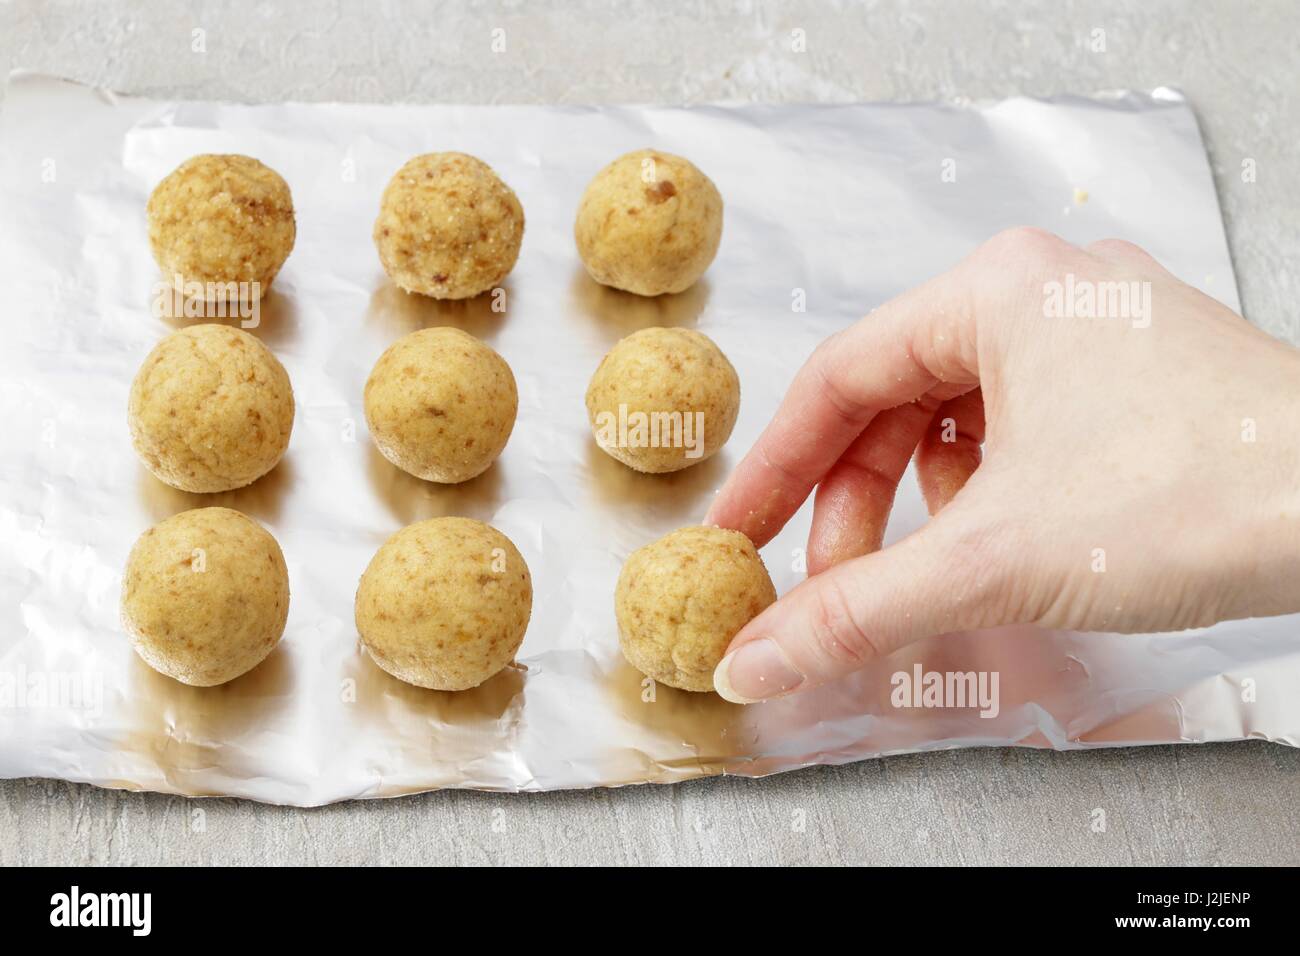 How To Make Cake Pops Round Out The Cake Balls With Your Hands